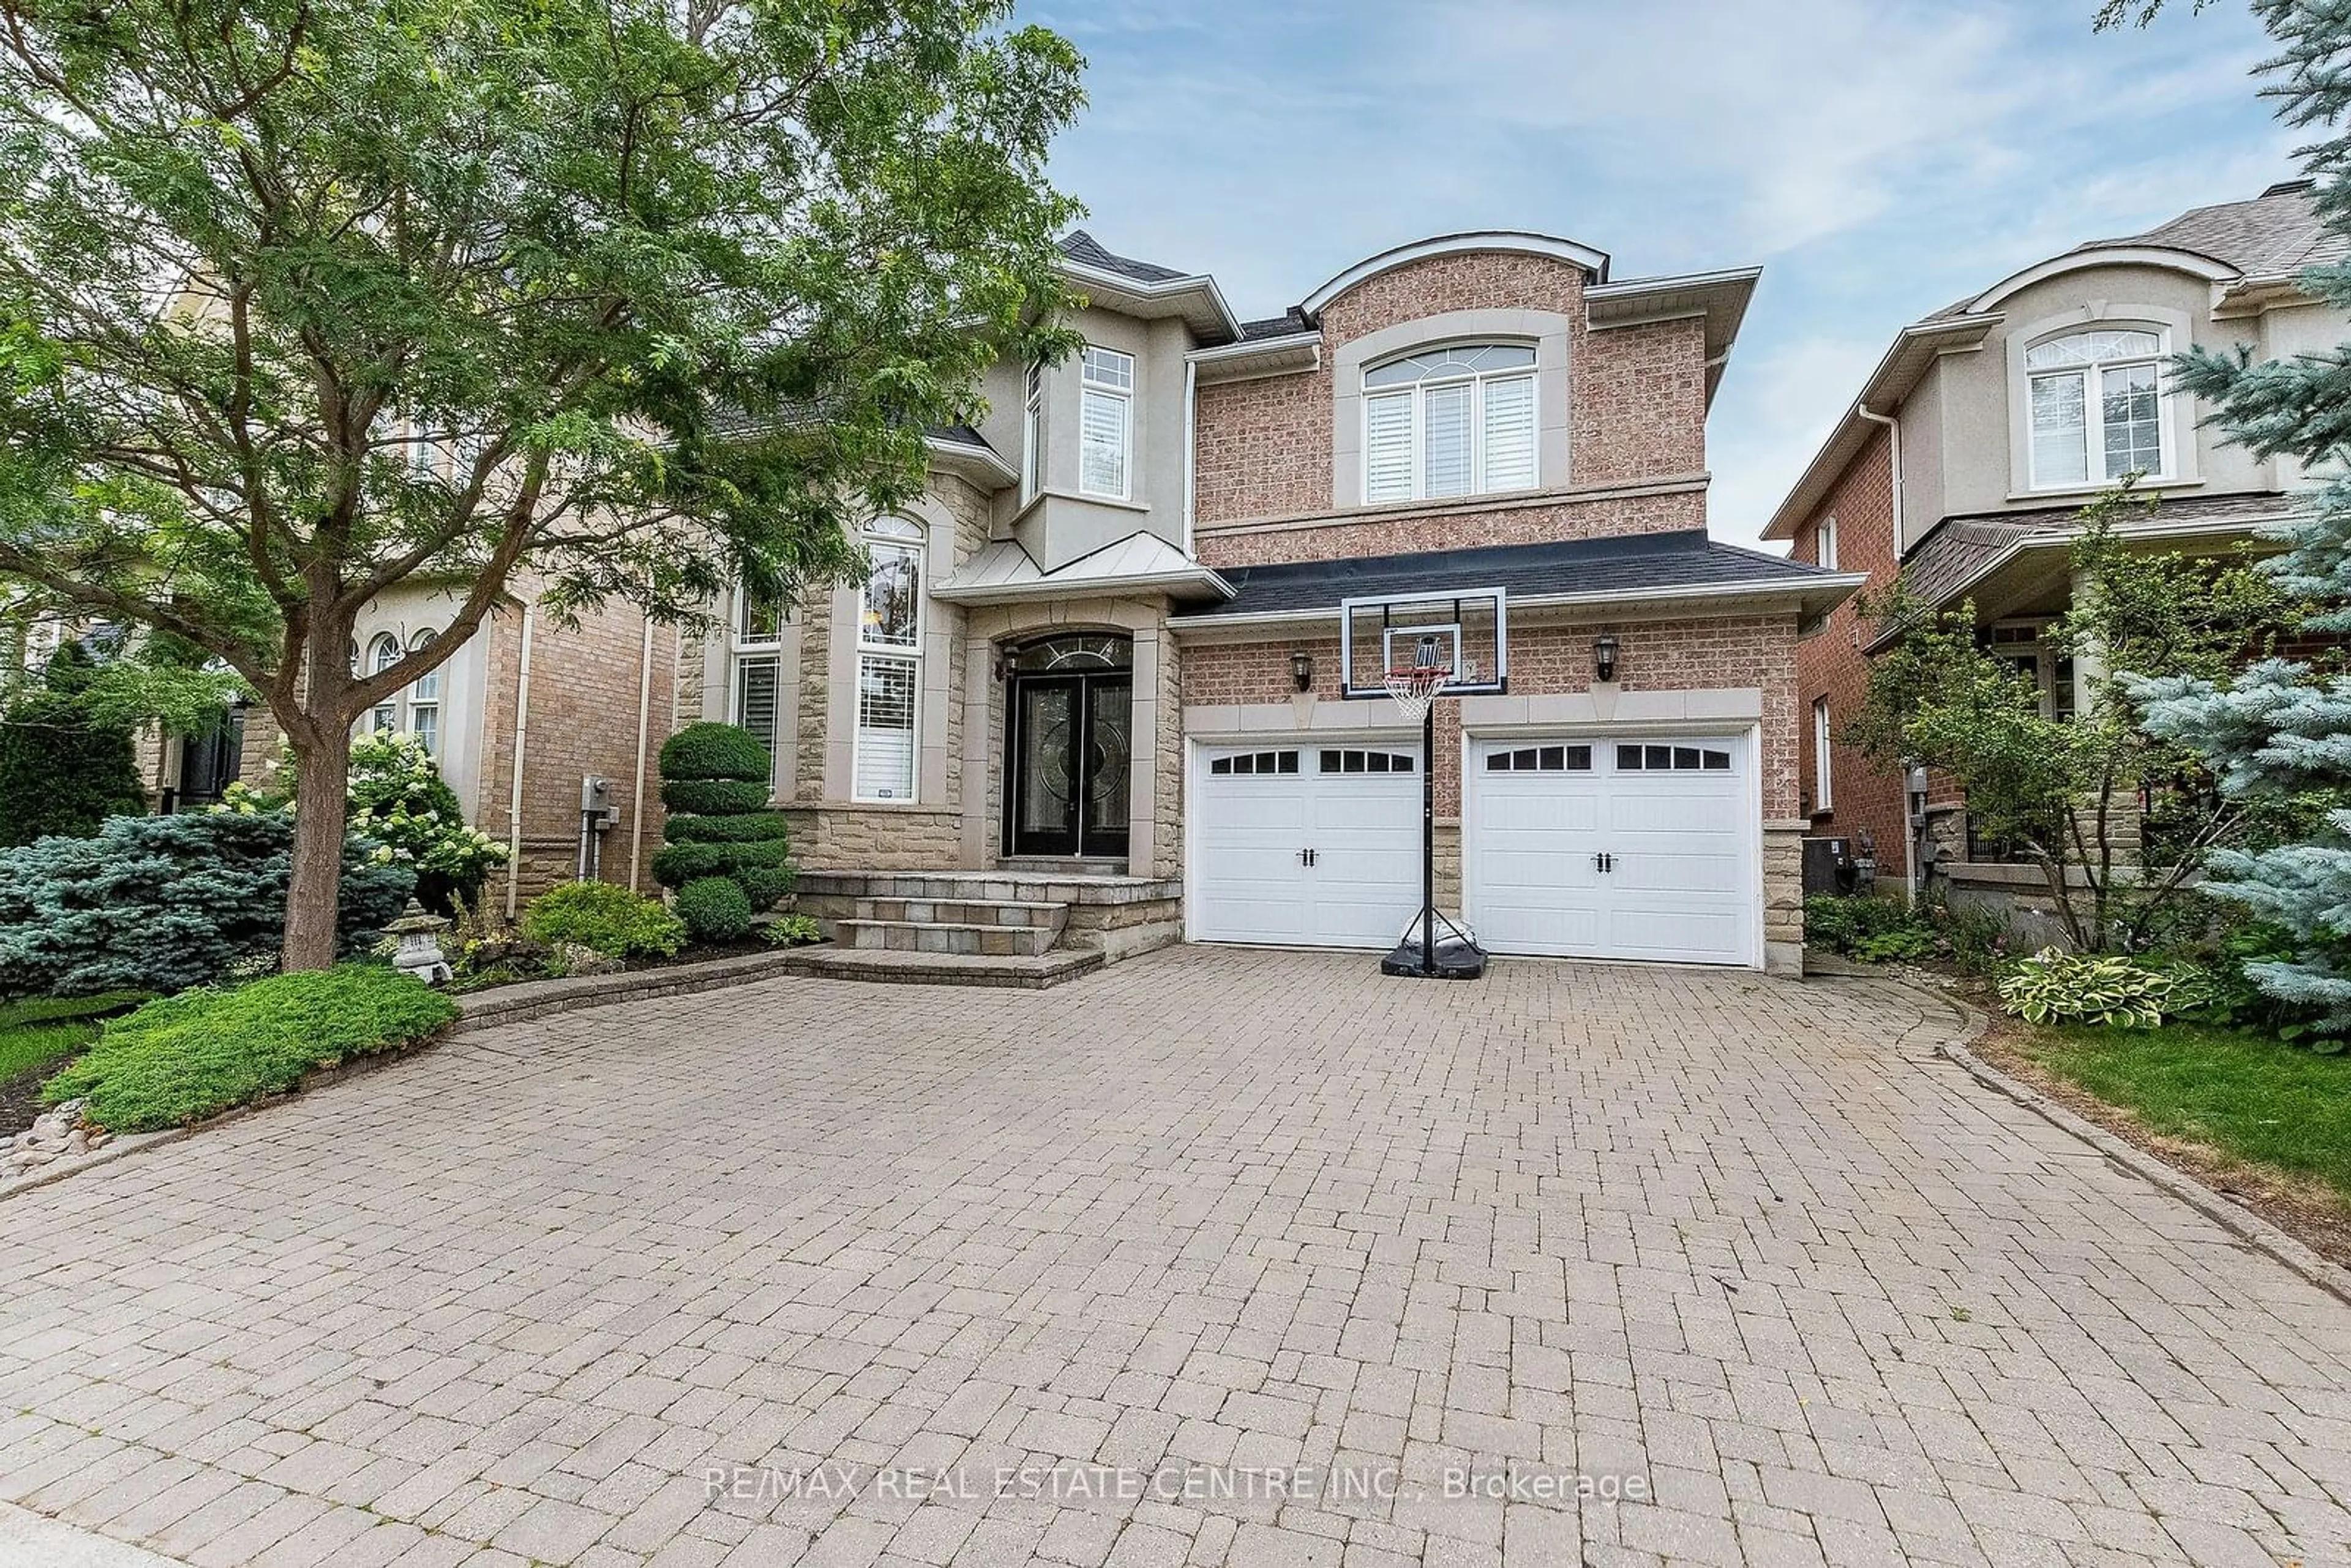 Home with brick exterior material for 18 Fogerty St, Brampton Ontario L6Y 5K2